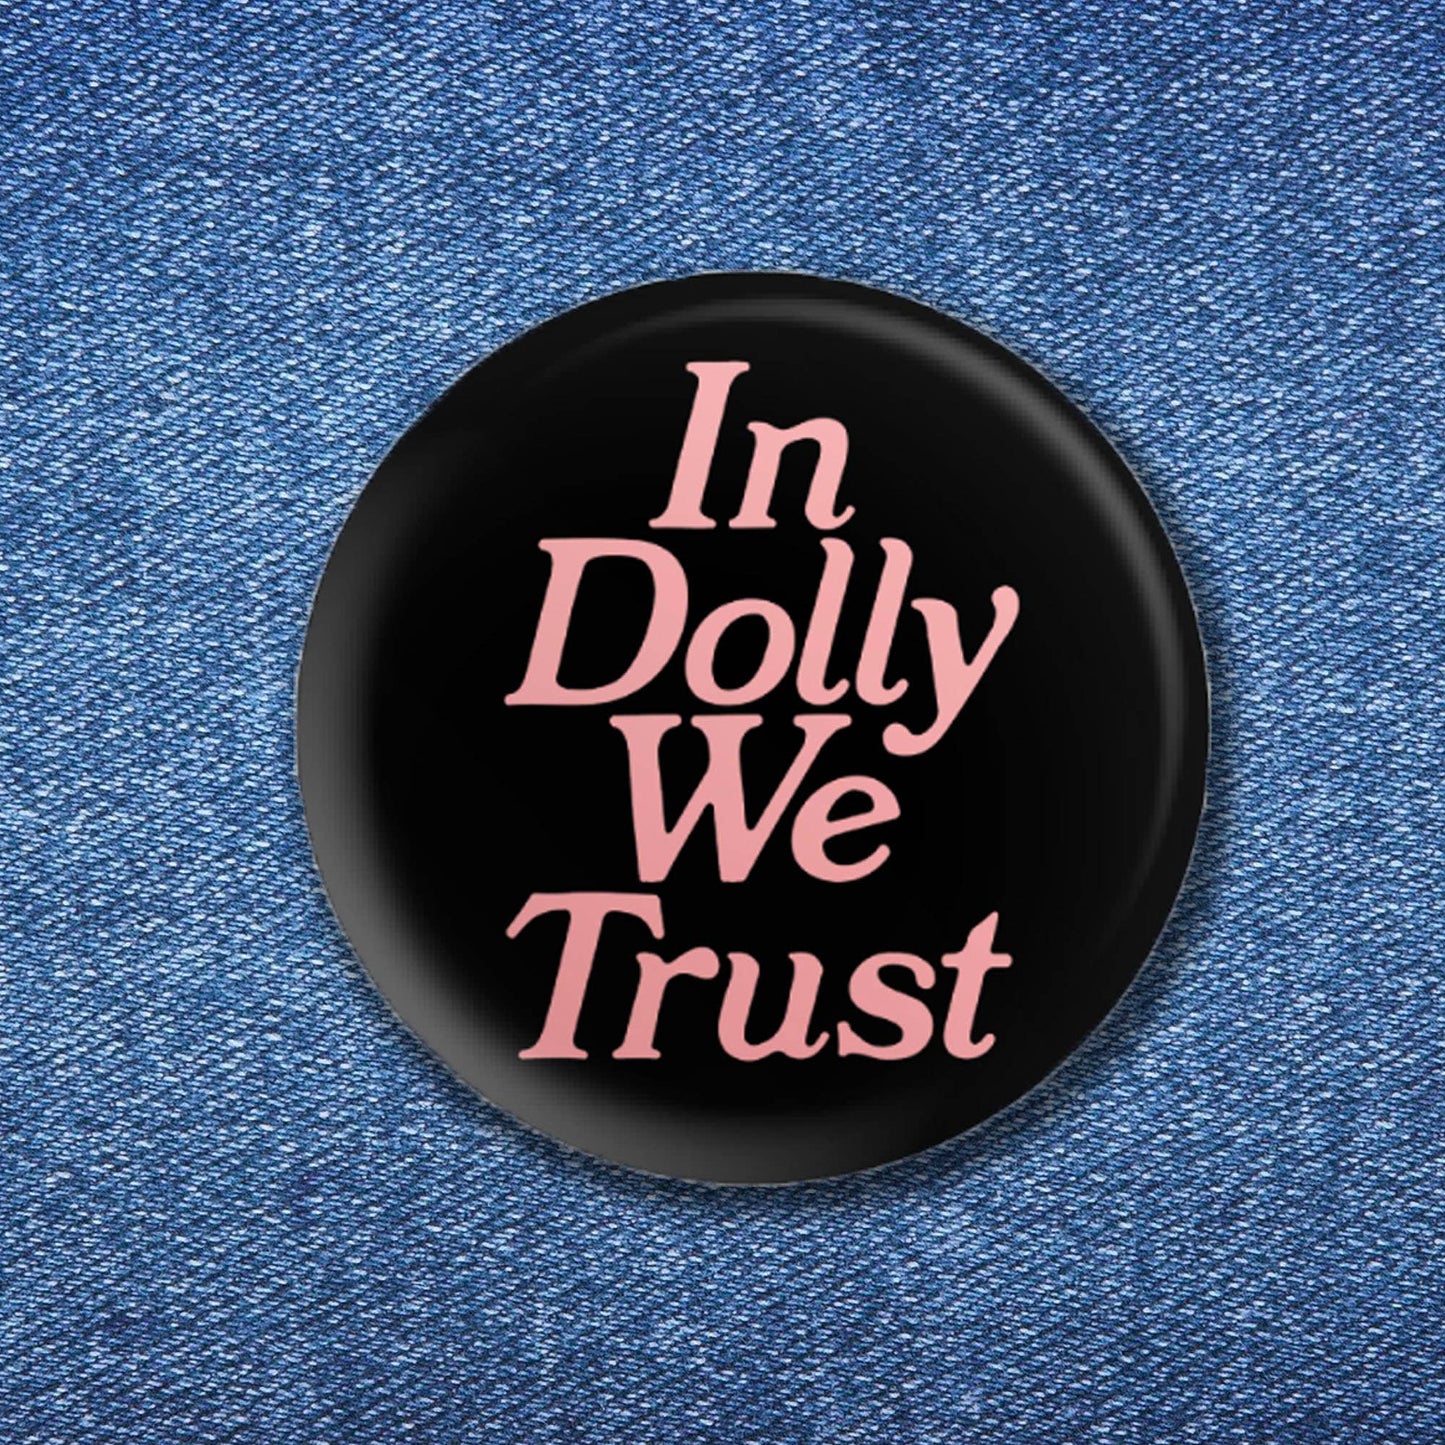 In Dolly We Trust Button